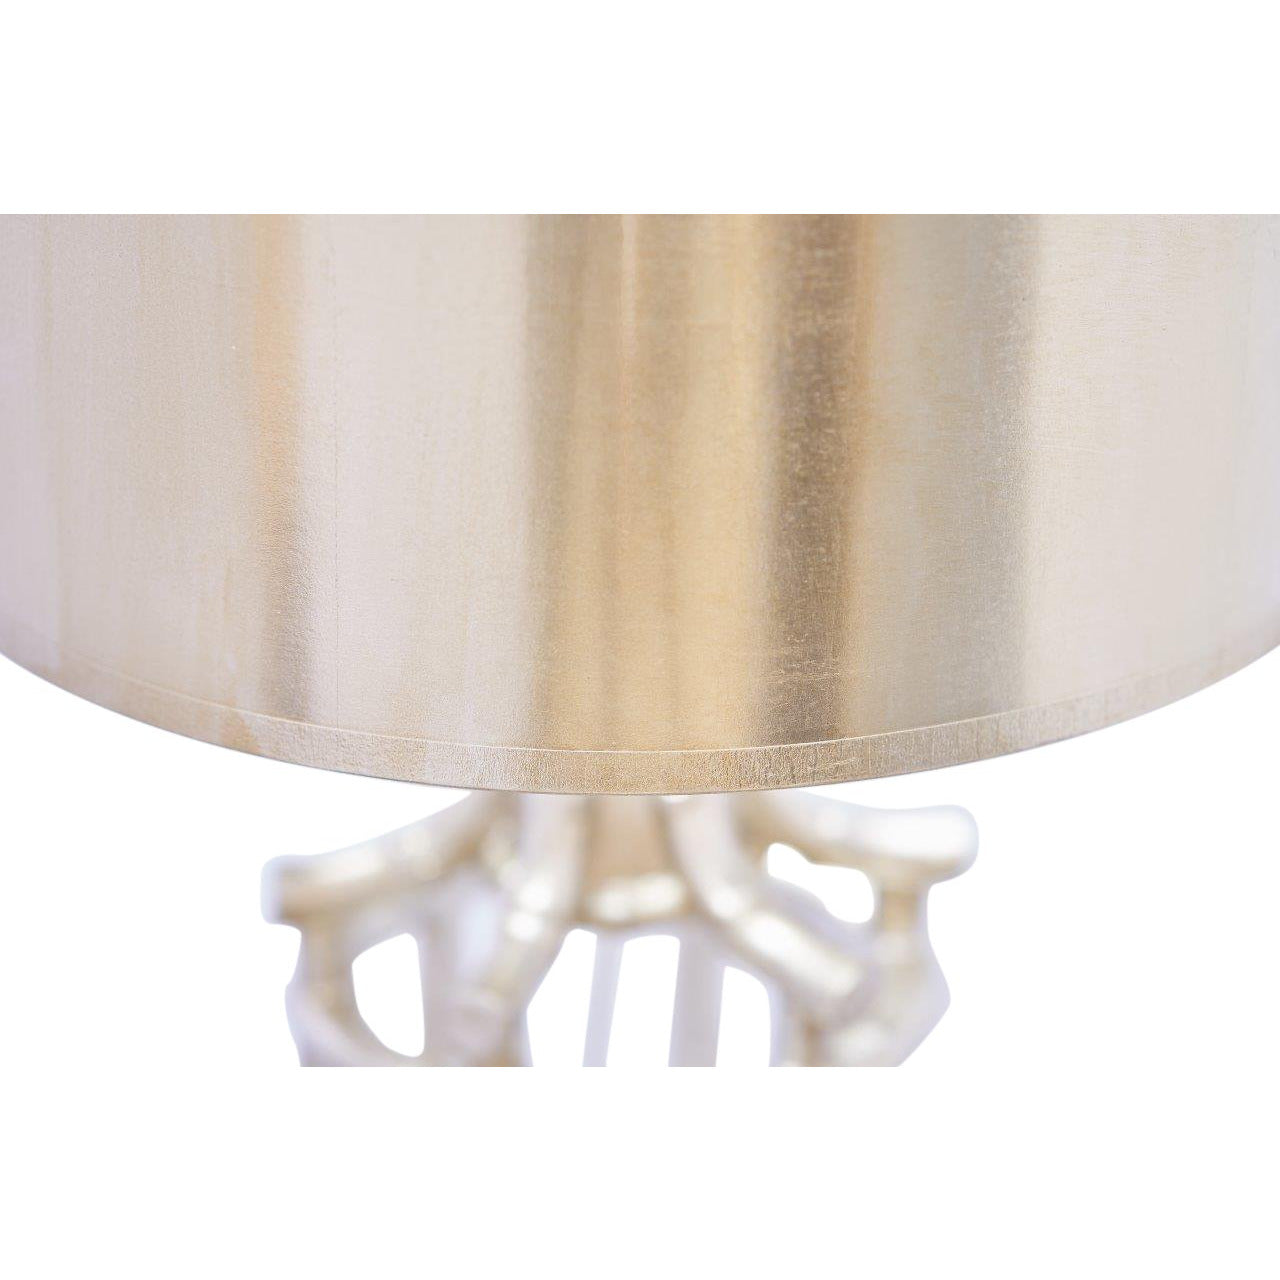 Bamboo Table Lamp, Silver - Couture Lamps